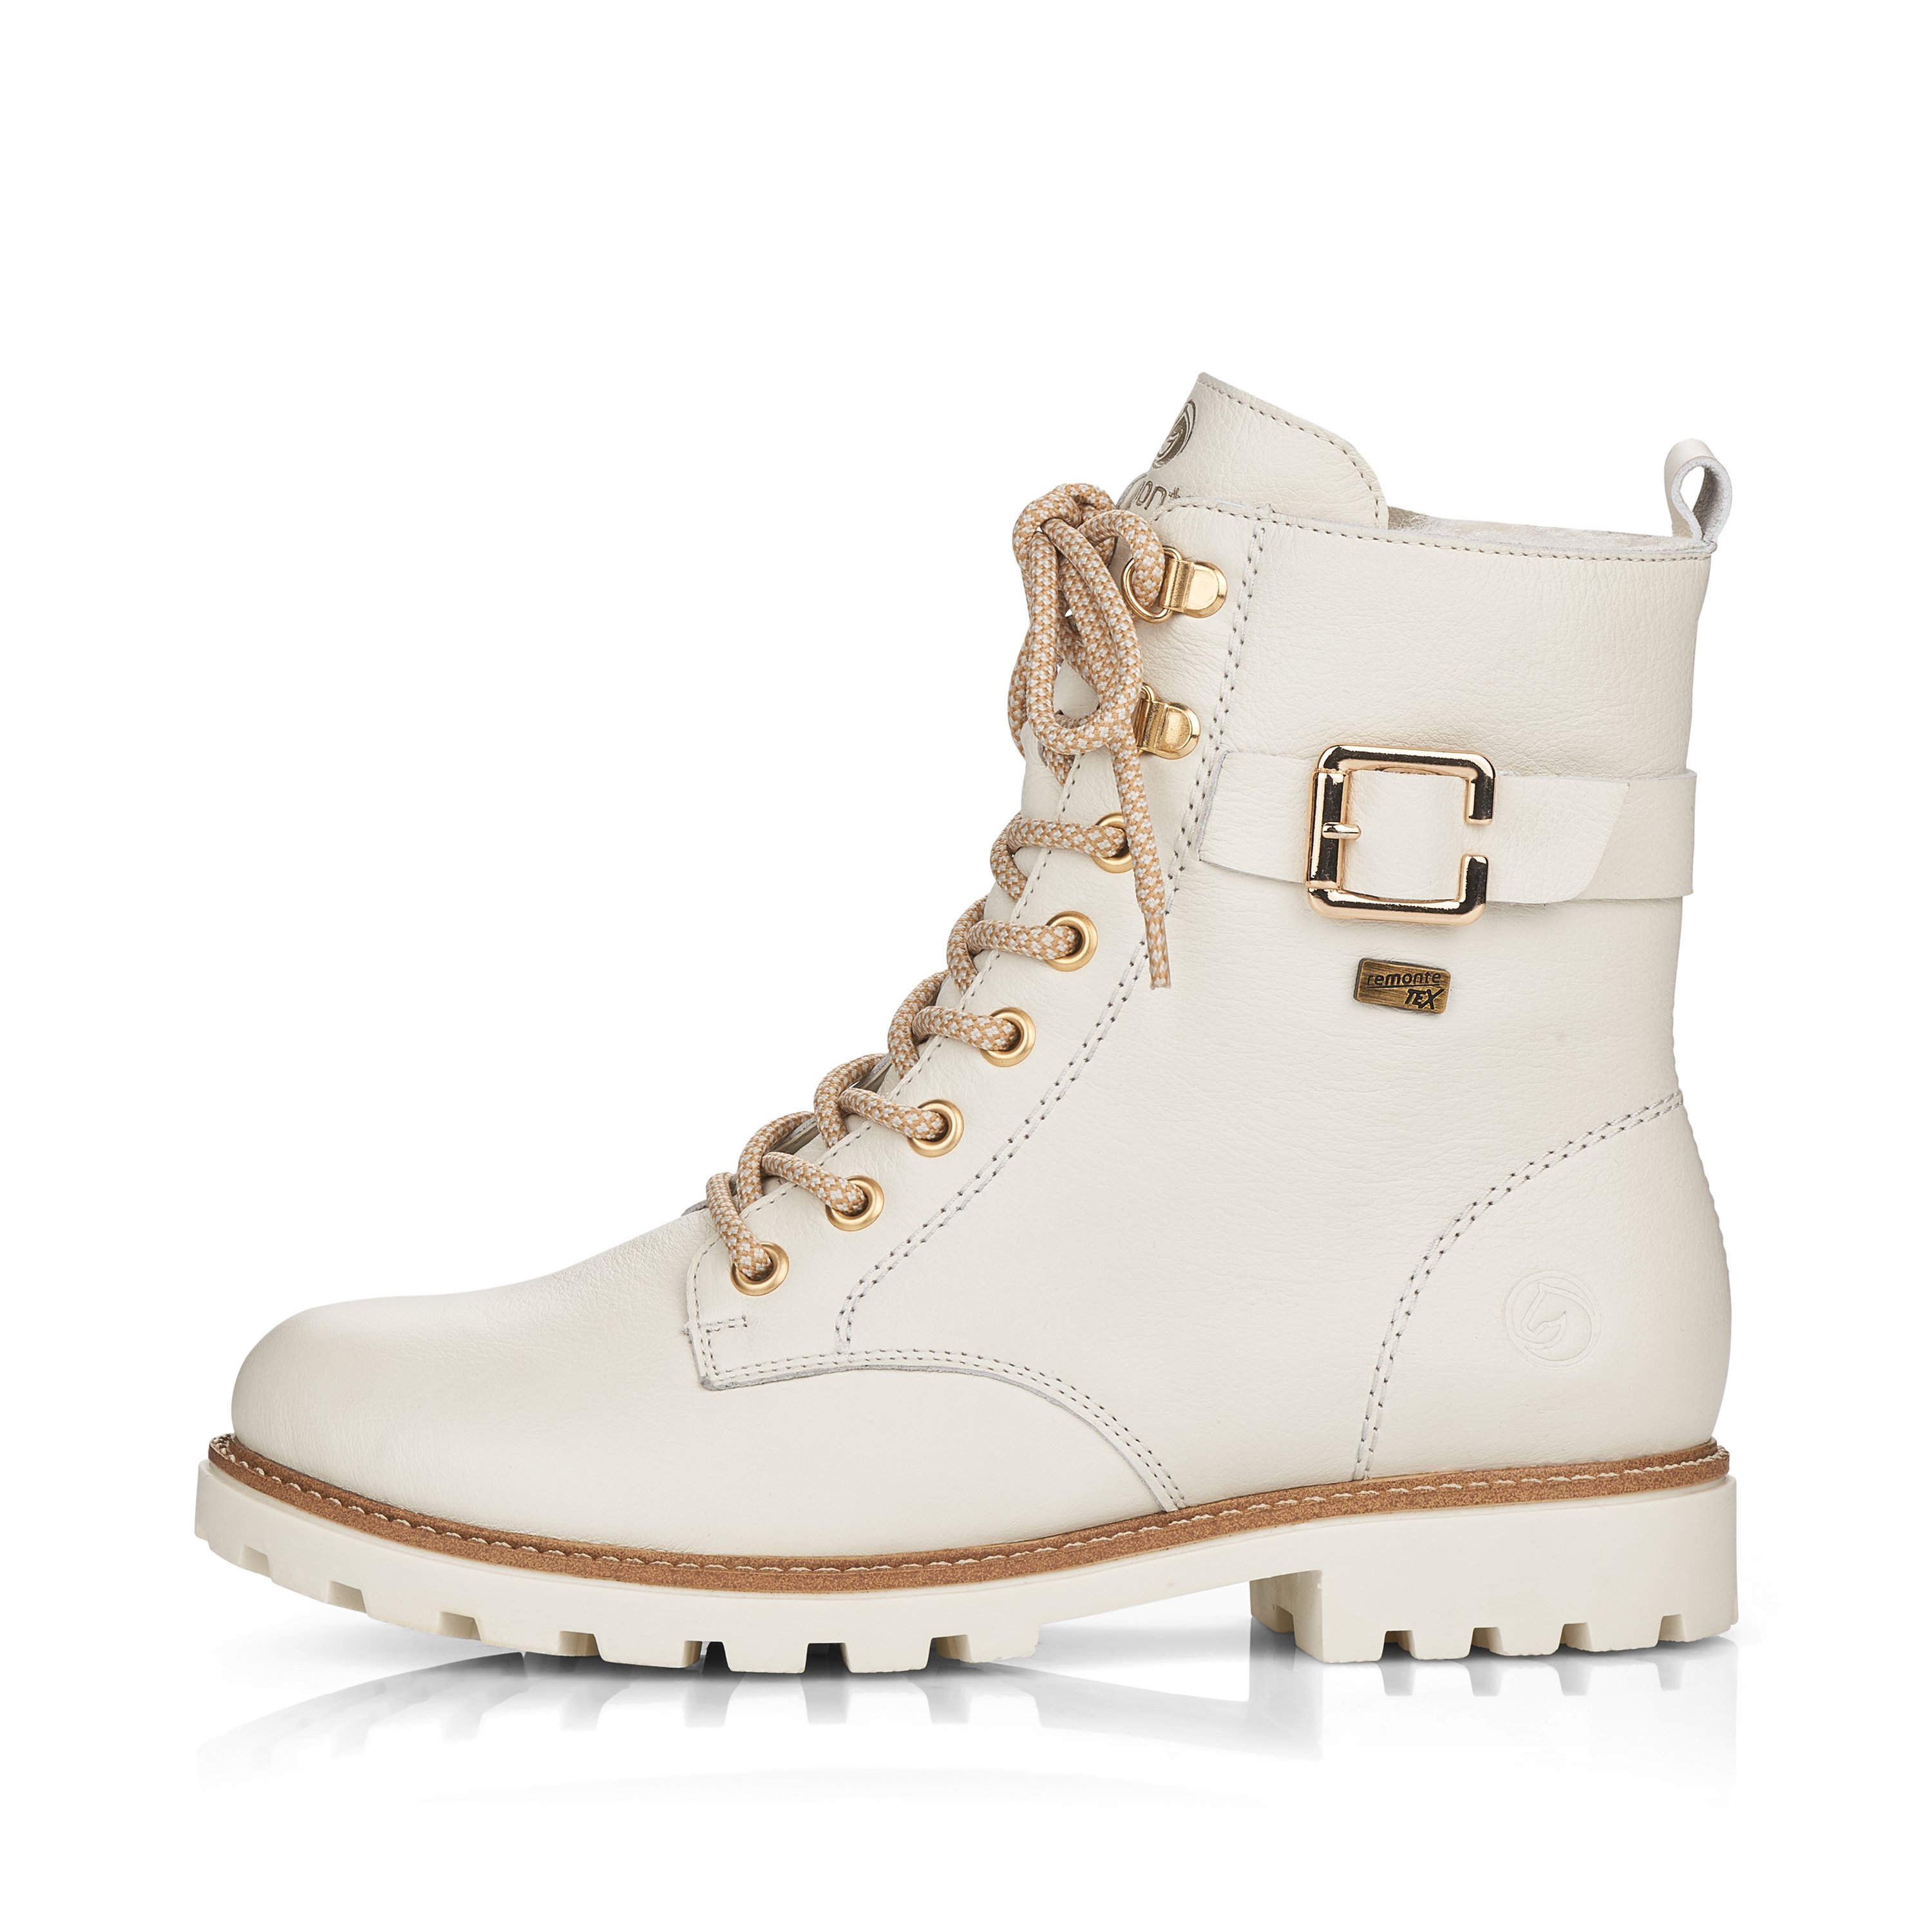 Off-white remonte women´s lace-up boots D8475-80 with flexible profile sole. The outside of the shoe